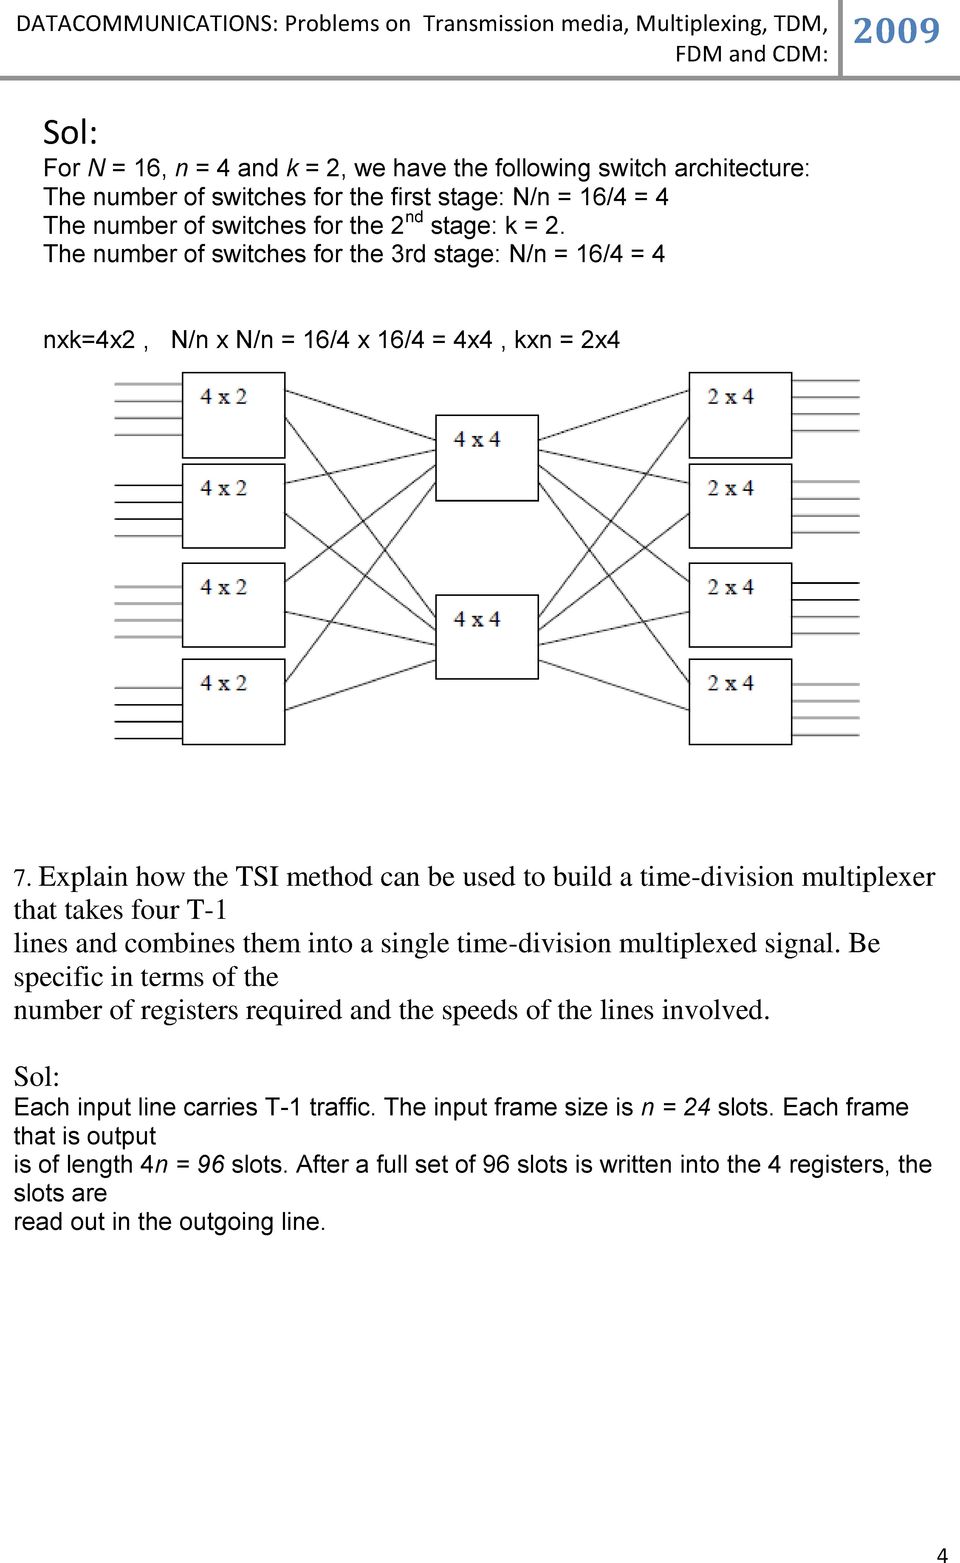 Explain how the TSI method can be used to build a time-division multiplexer that takes four T-1 lines and combines them into a single time-division multiplexed signal.